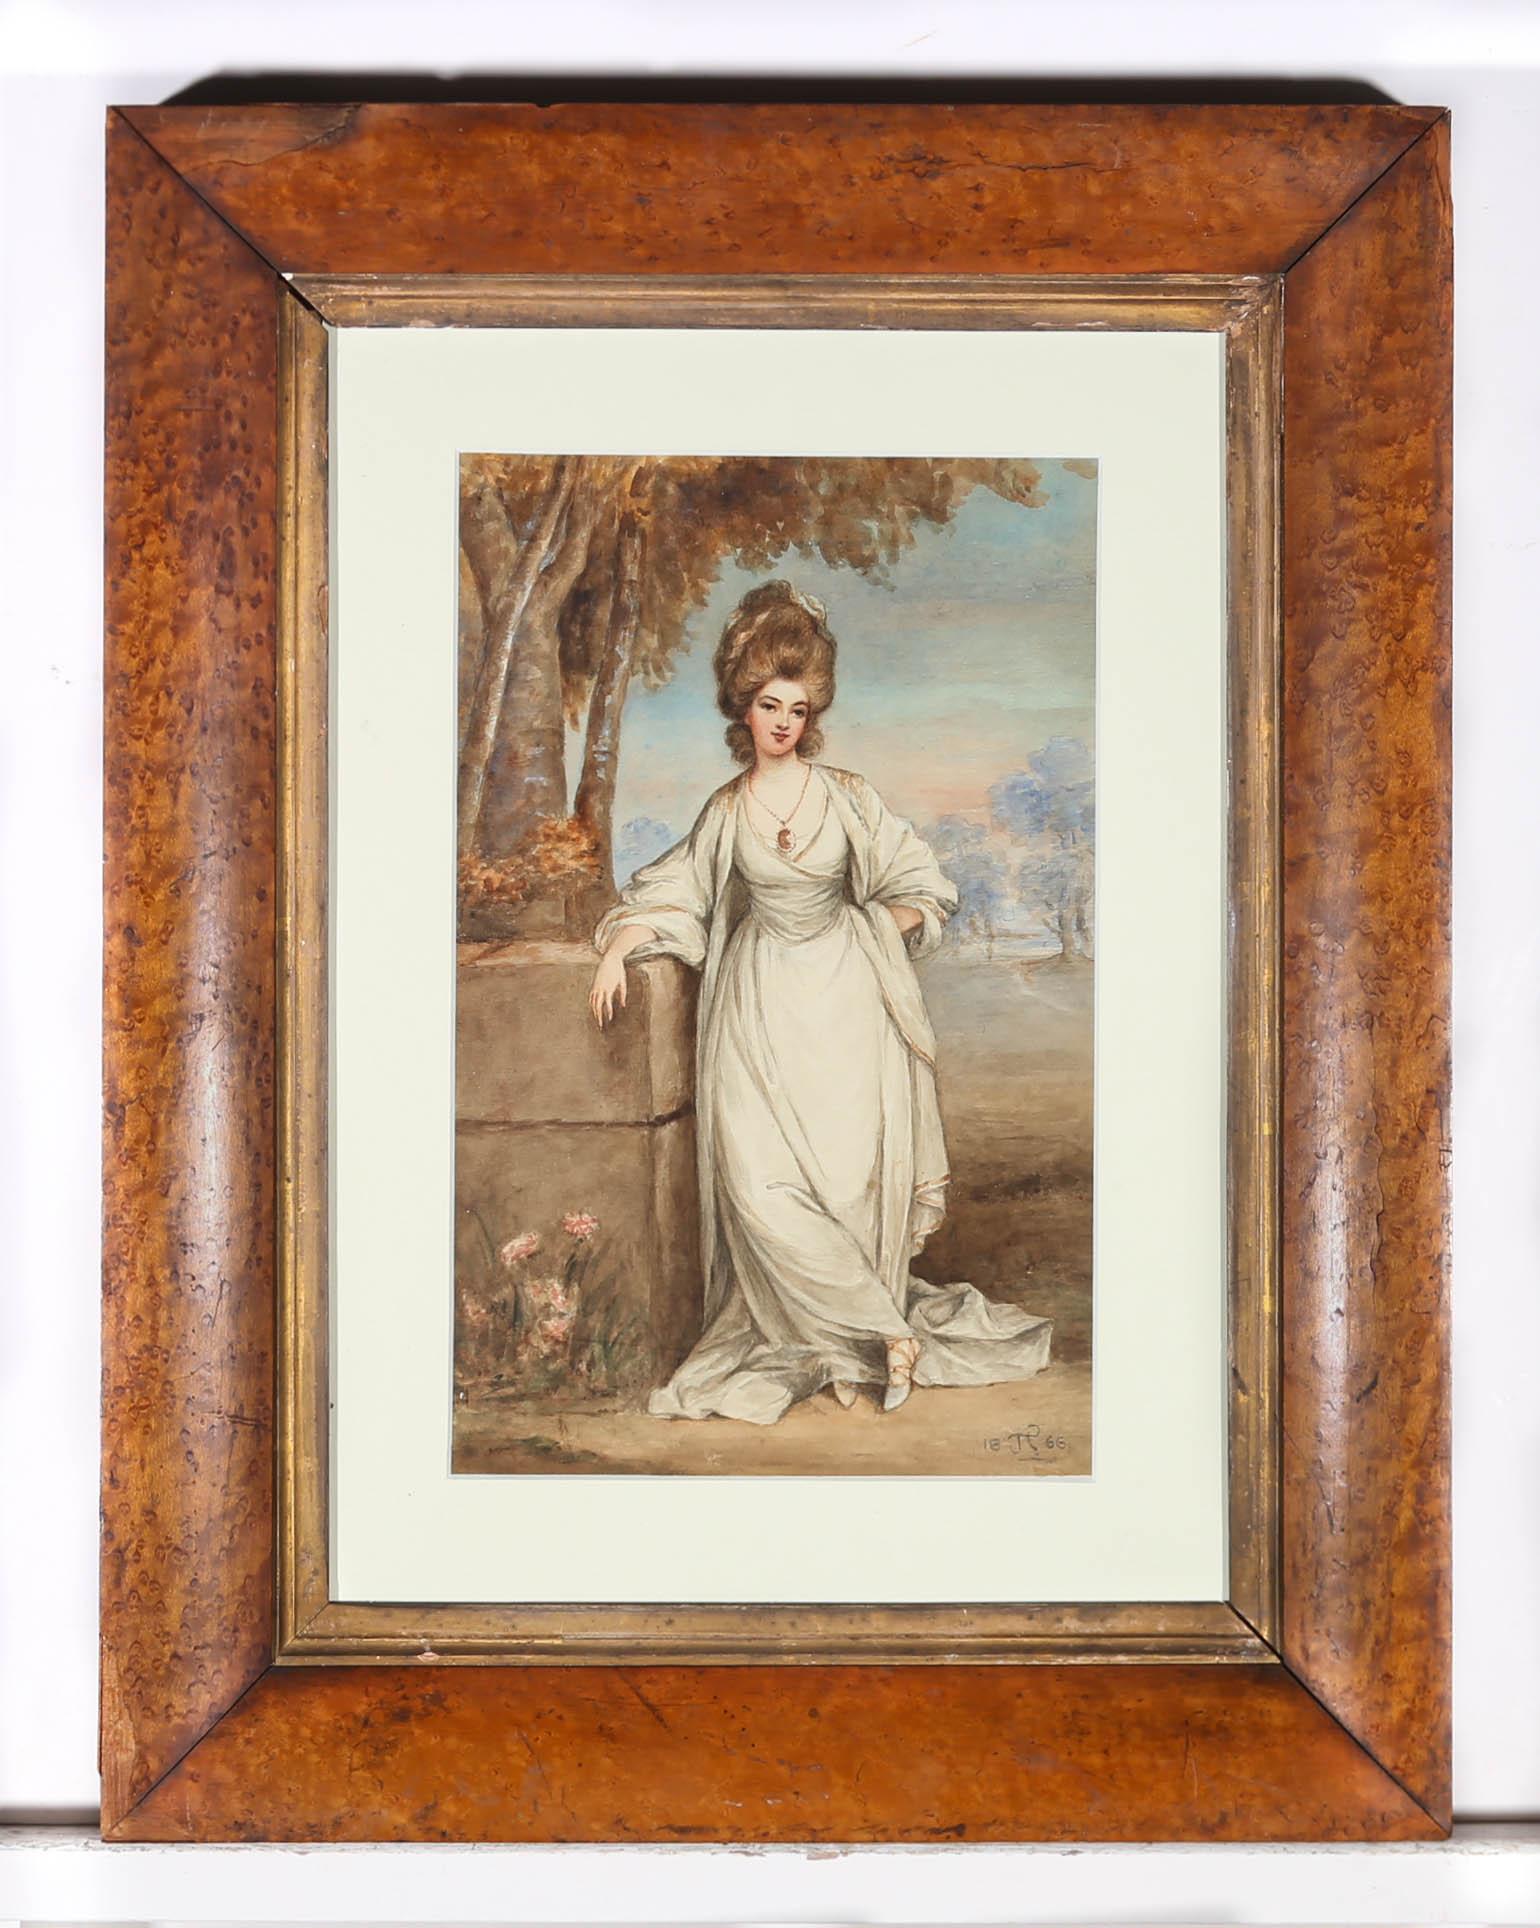 A charming late 19th Century watercolour showing a finely dressed young lady in a flowing white gown and elegantly styled hair in the fashion of the 18th Century. The artist has monogrammed and dated to the lower right corner and the painting has